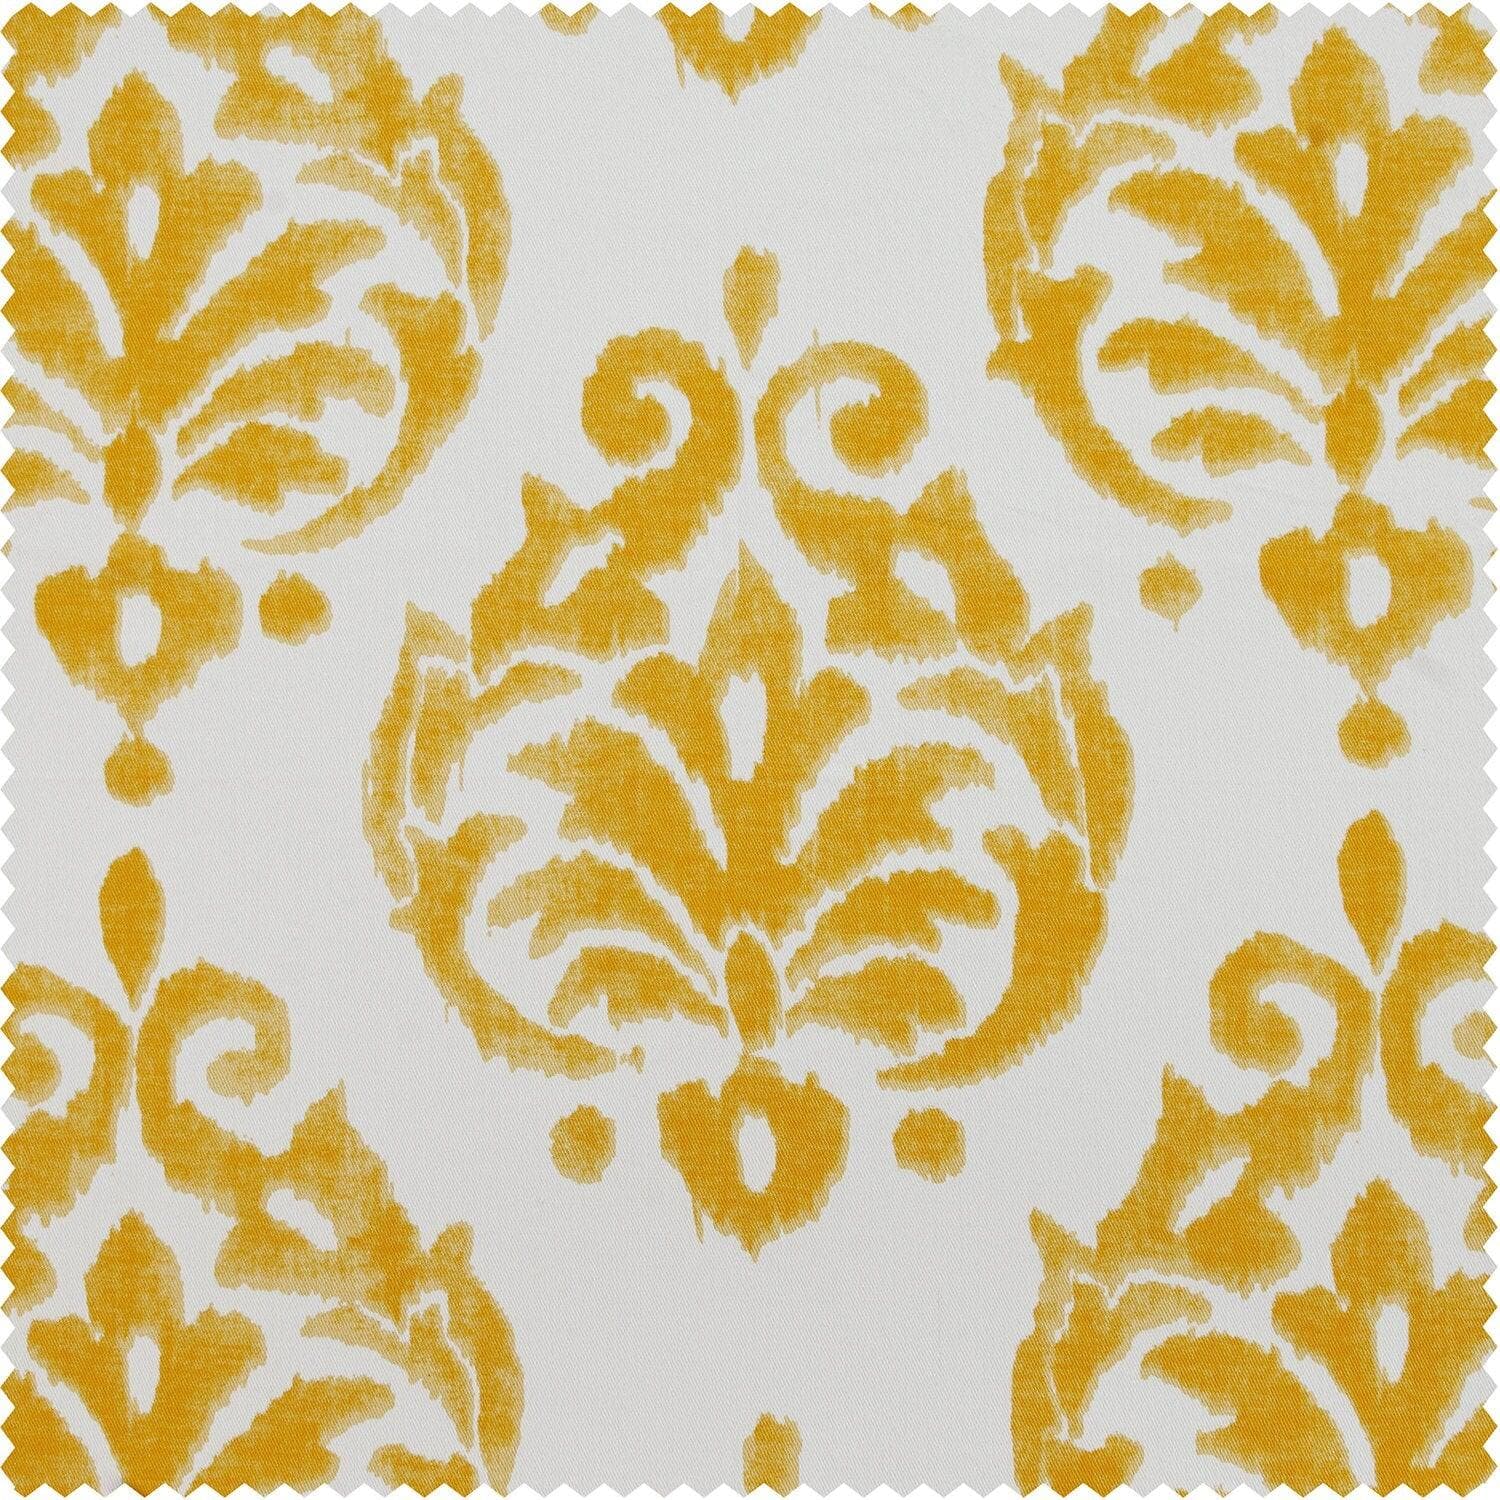 Sandlewood Gold French Pleat Printed Cotton Curtain